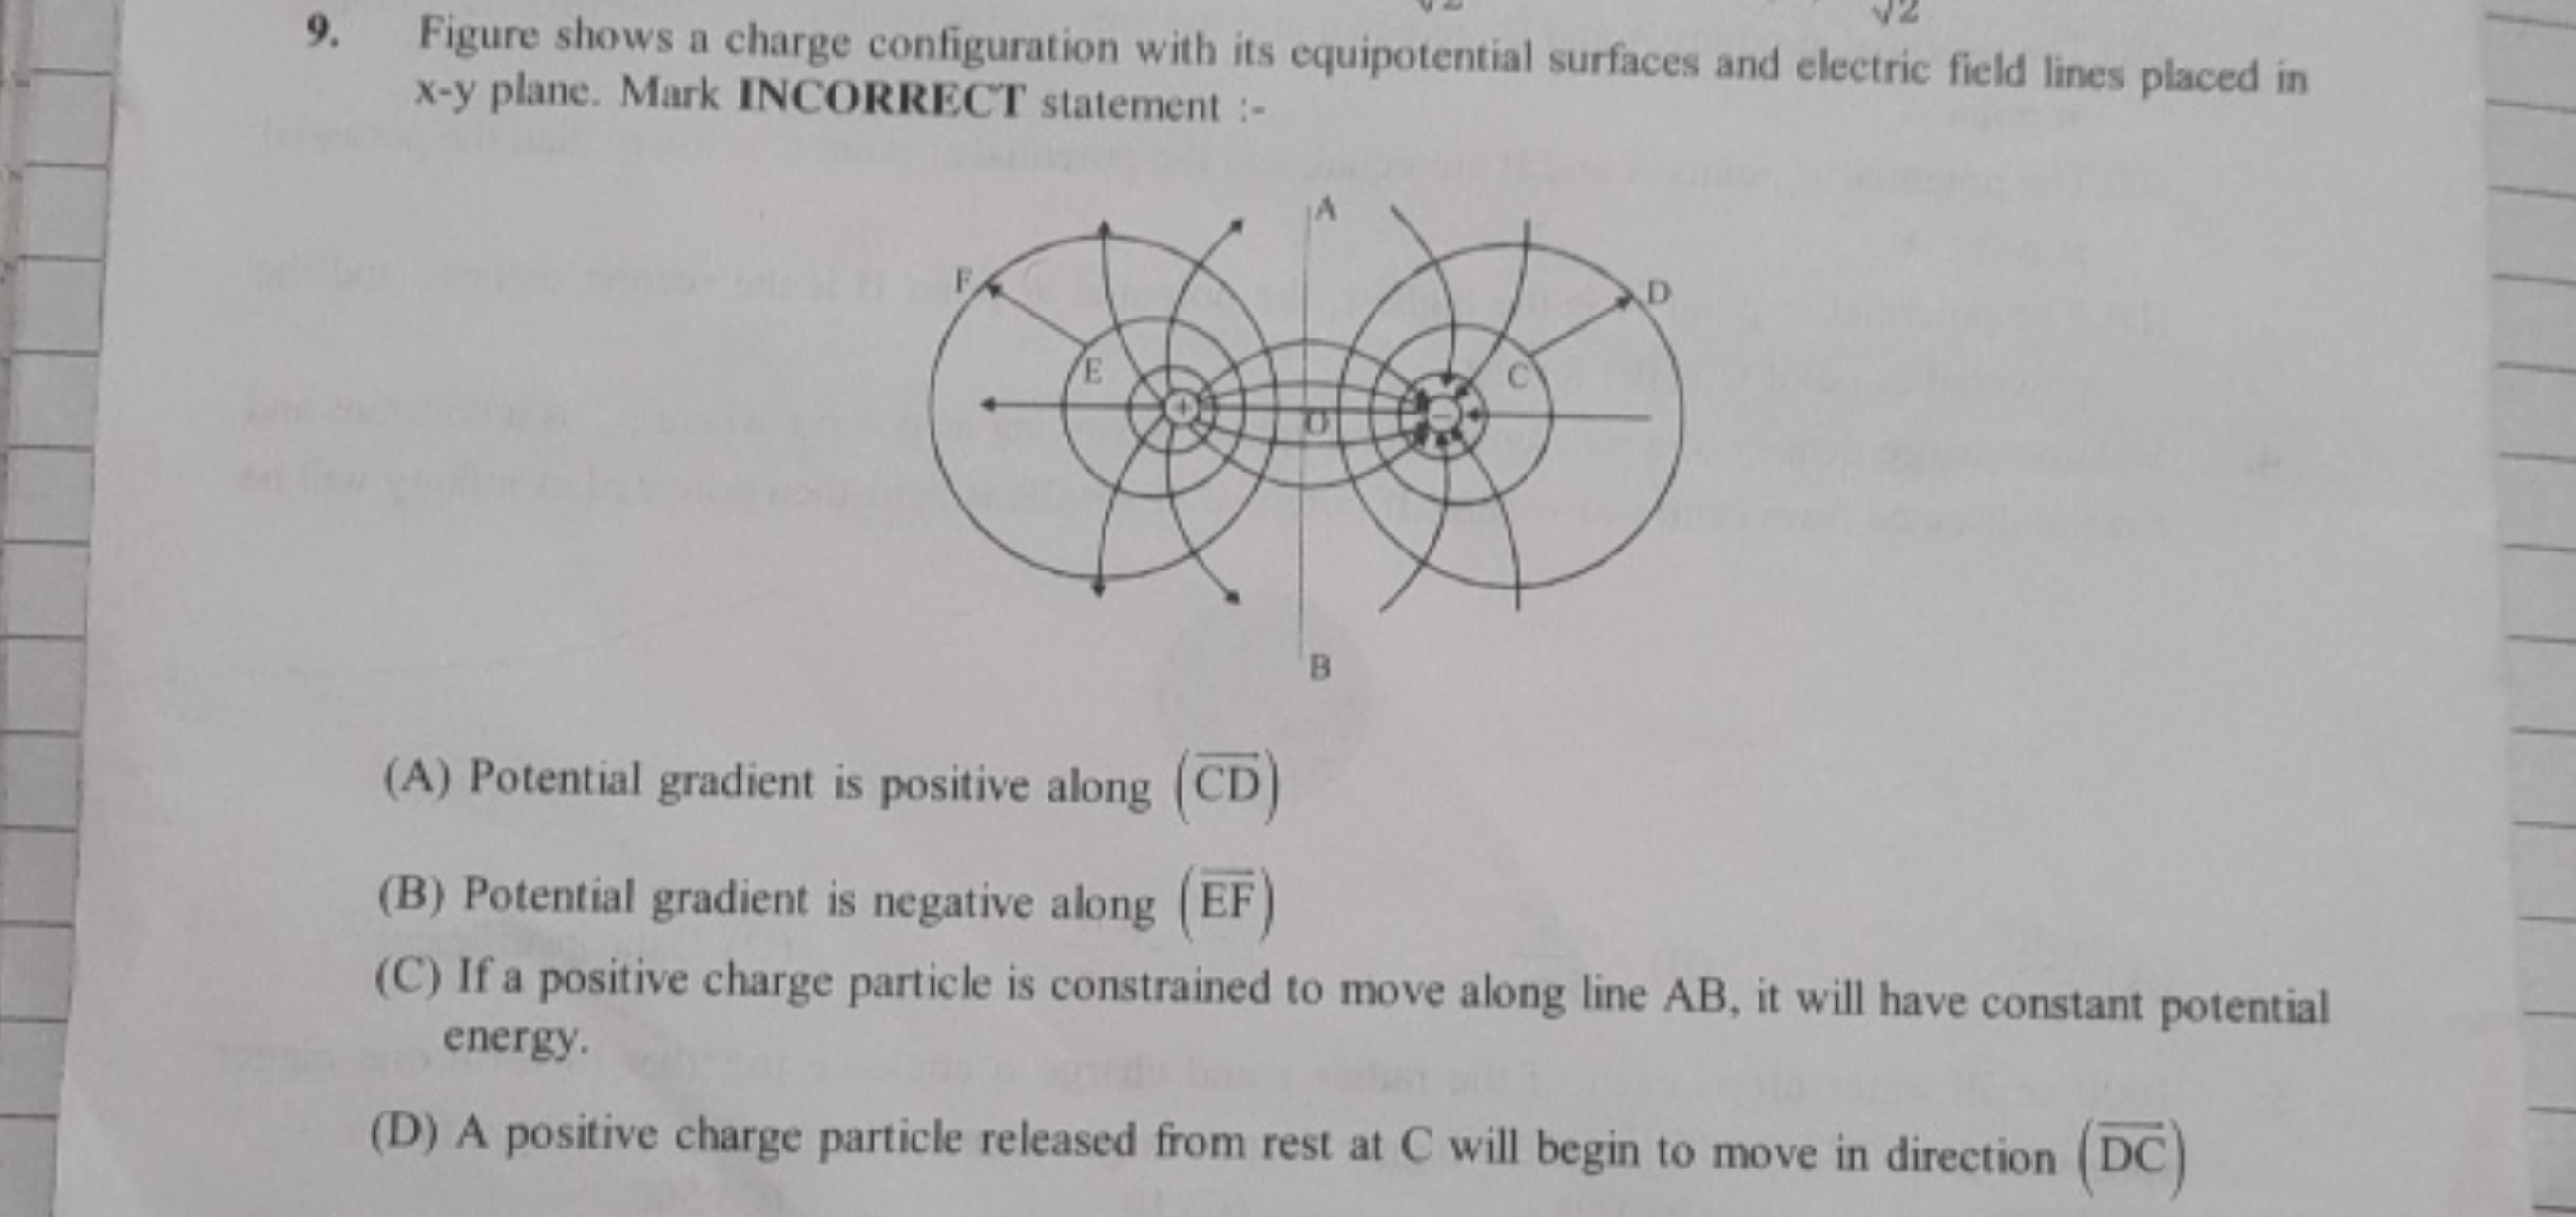 Figure shows a charge configuration with its equipotential surfaces an